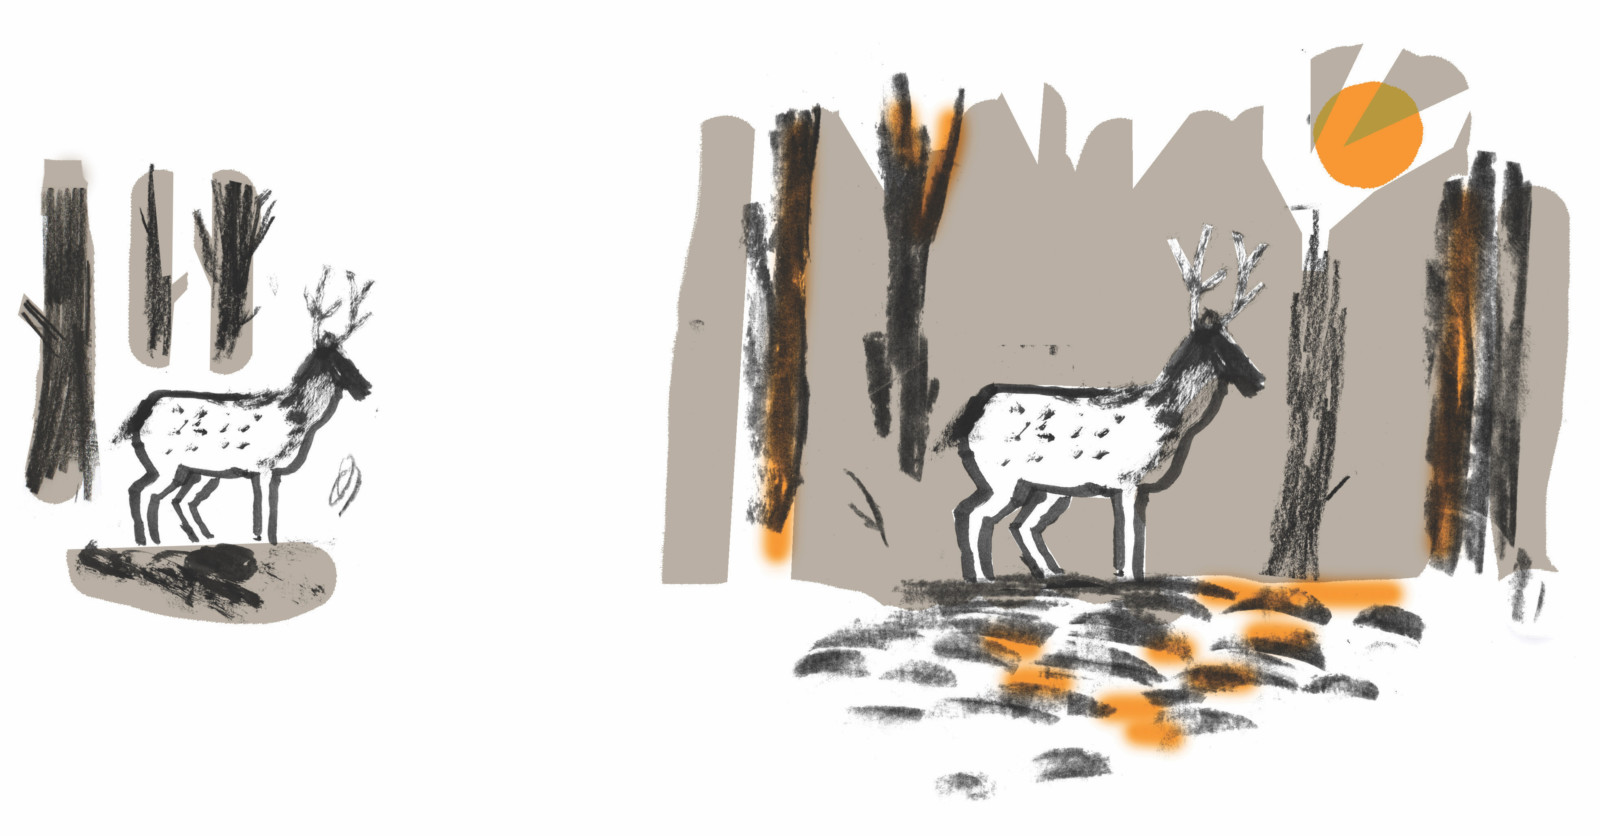 An illustration of two deer in a forest at night